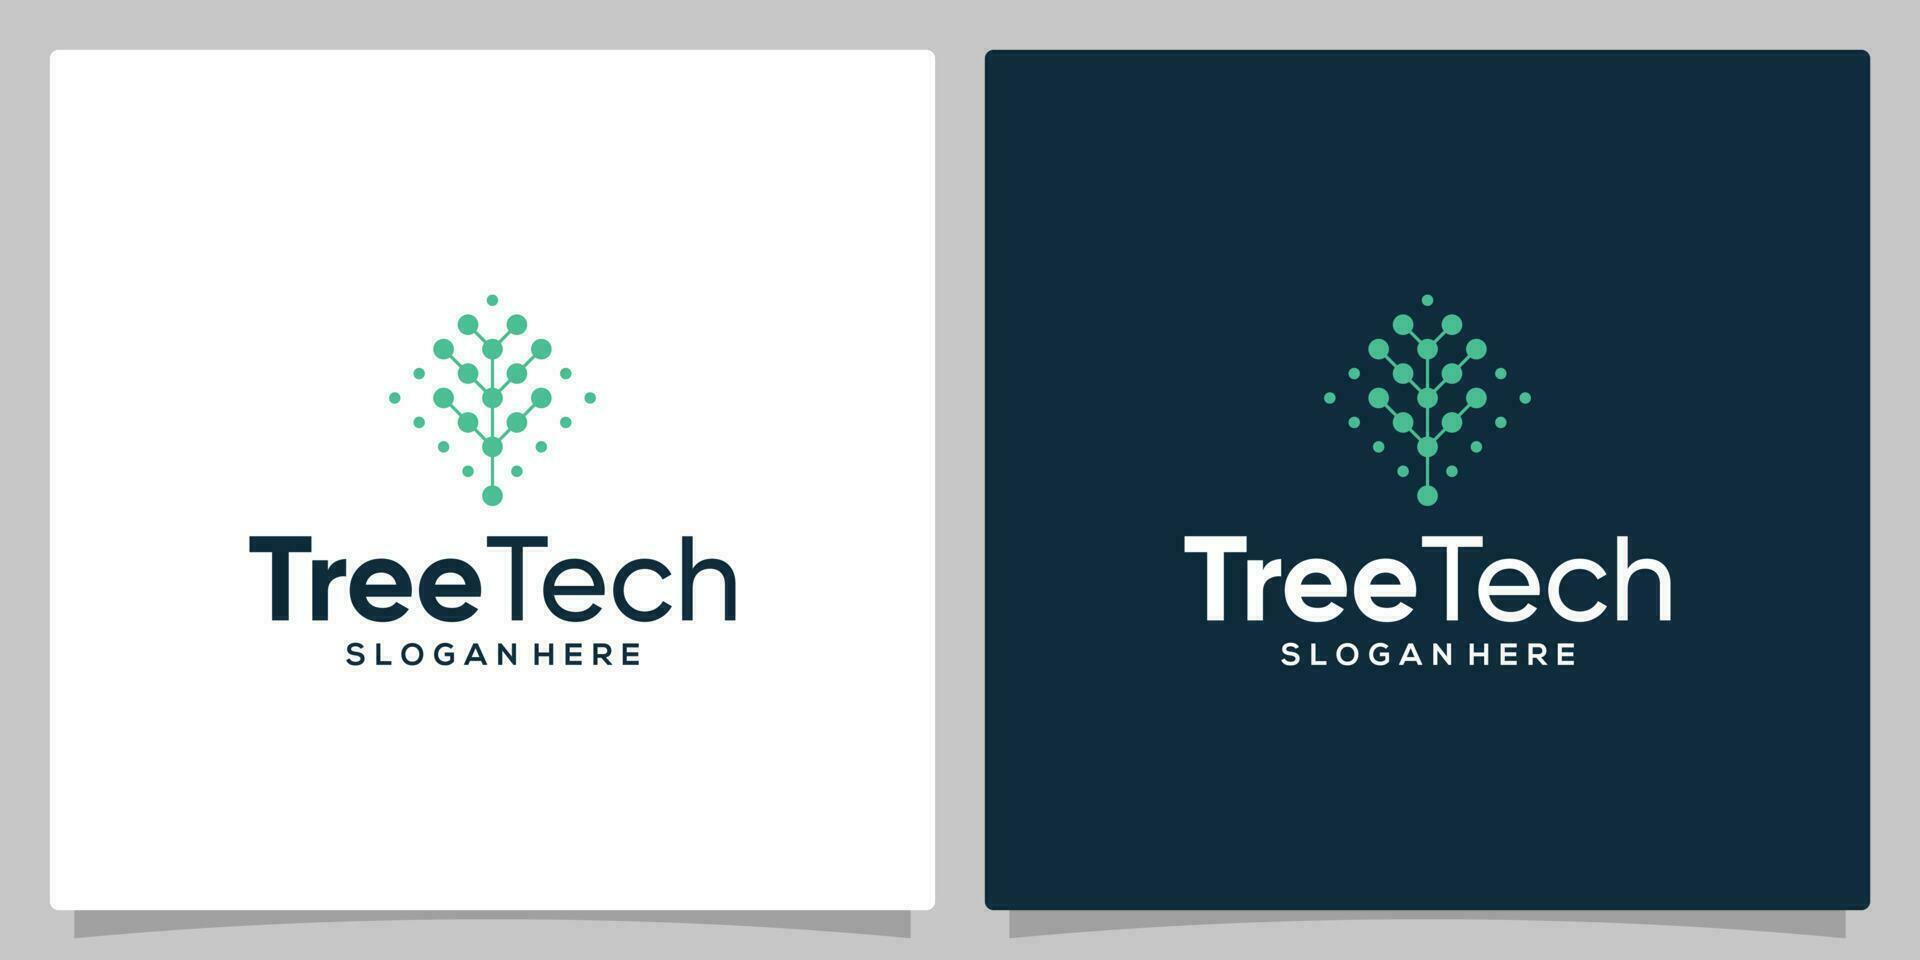 Inspiration logo tree abstract with tech style. Premium vector